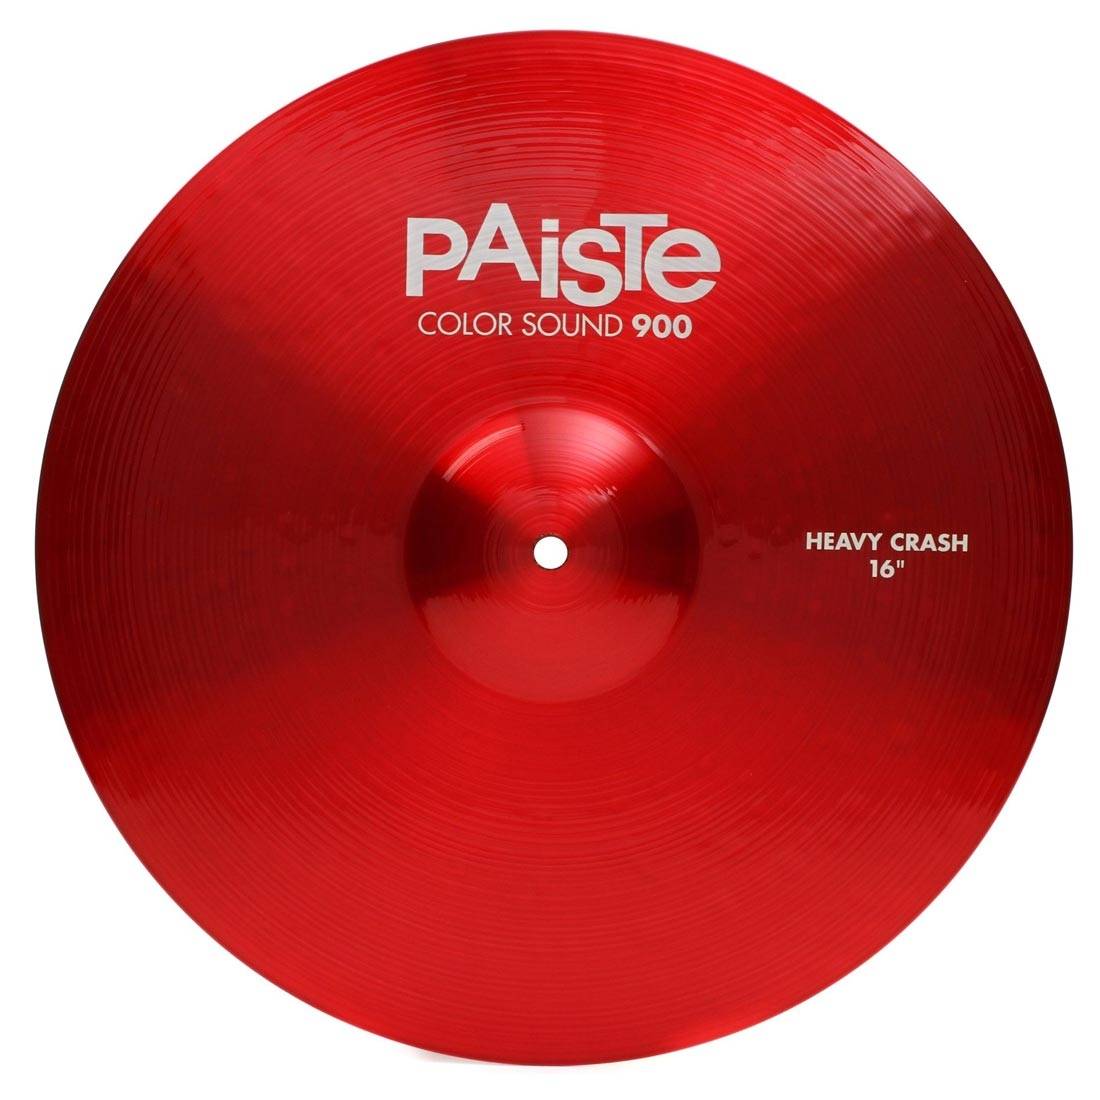 PAISTE 900 Color Sound 16'' Red Heavy Crash Cymbal